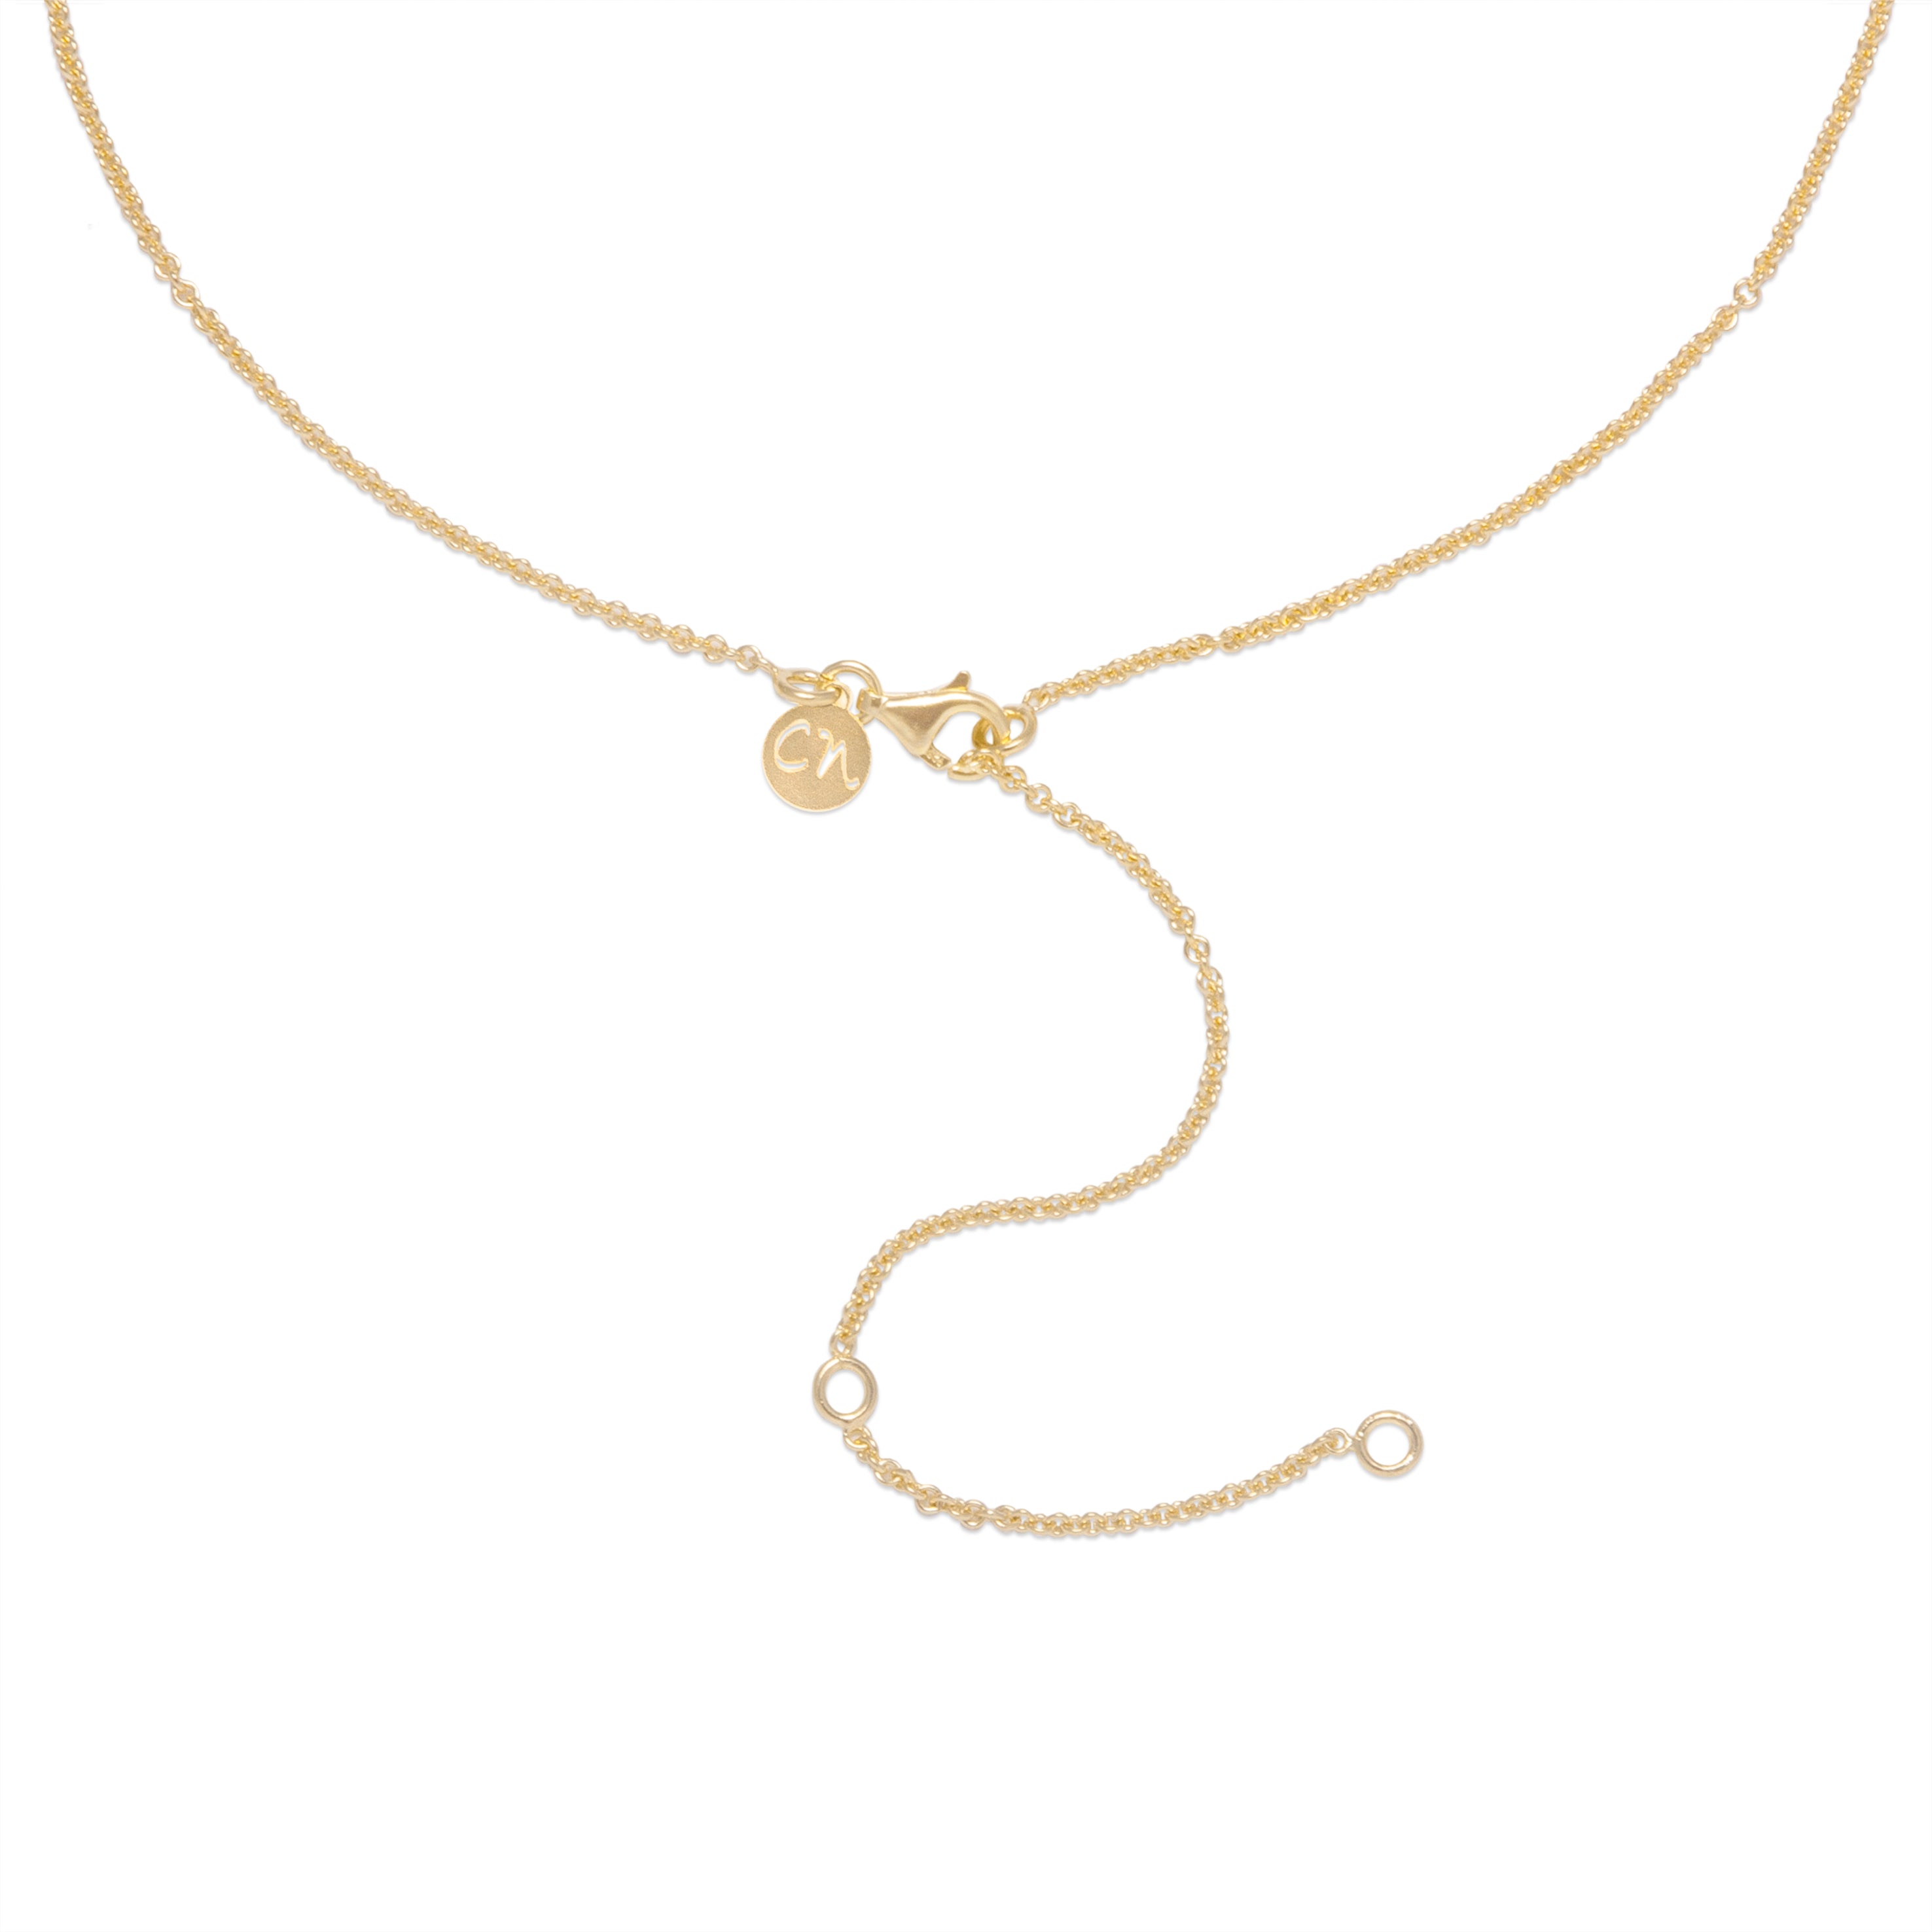 Claudia Navarro Jewelry- Necklace Amour / Gold